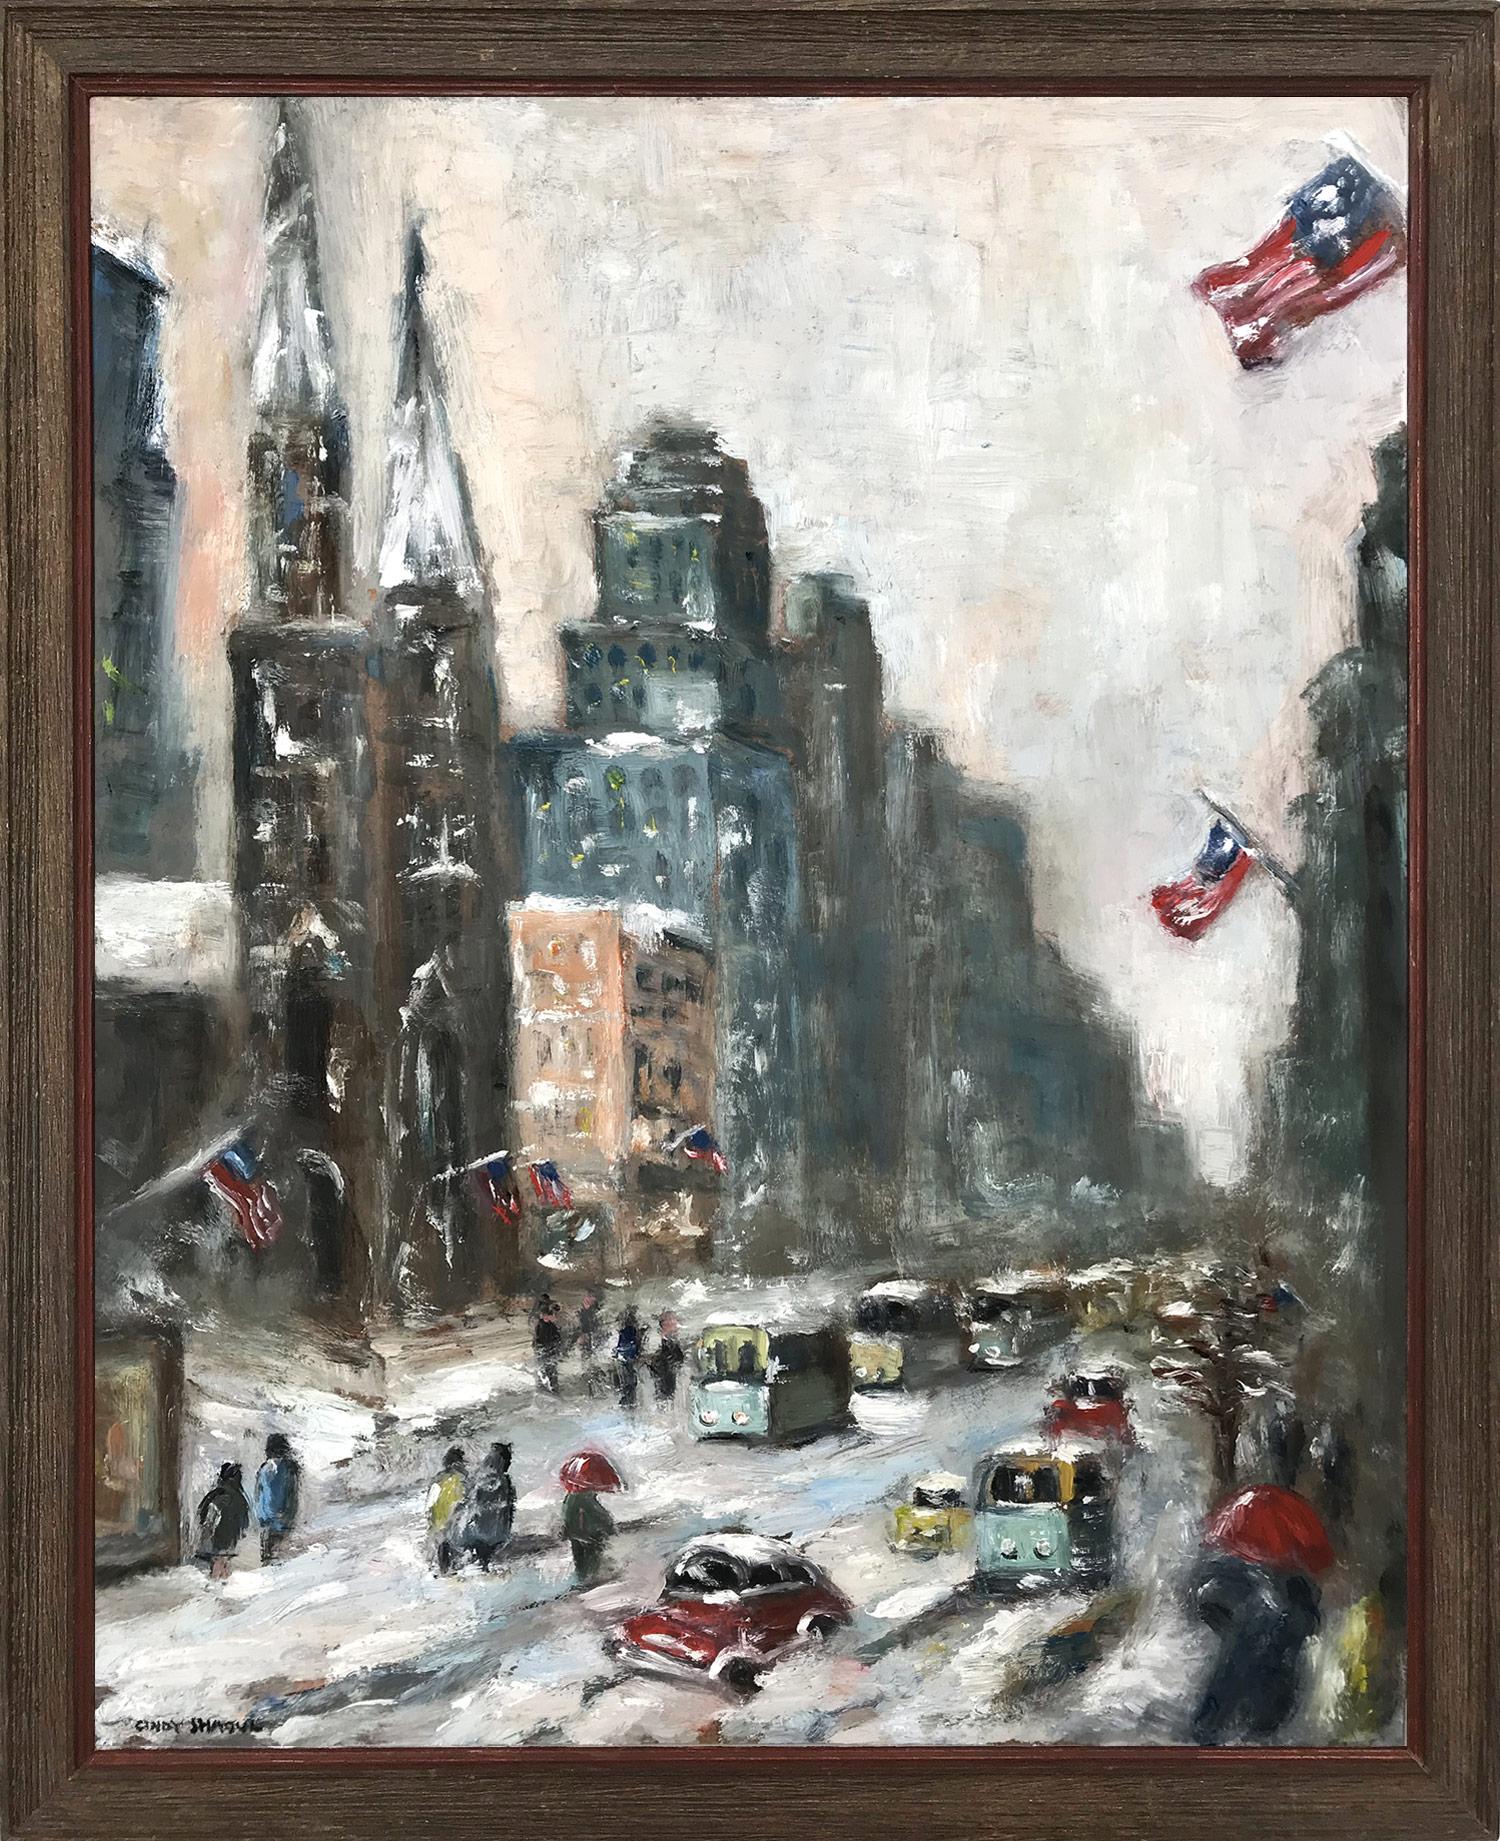 Cindy Shaoul Figurative Painting - Snow in Downtown Wall Street, Impressionist Street Scene in style of Guy Wiggins